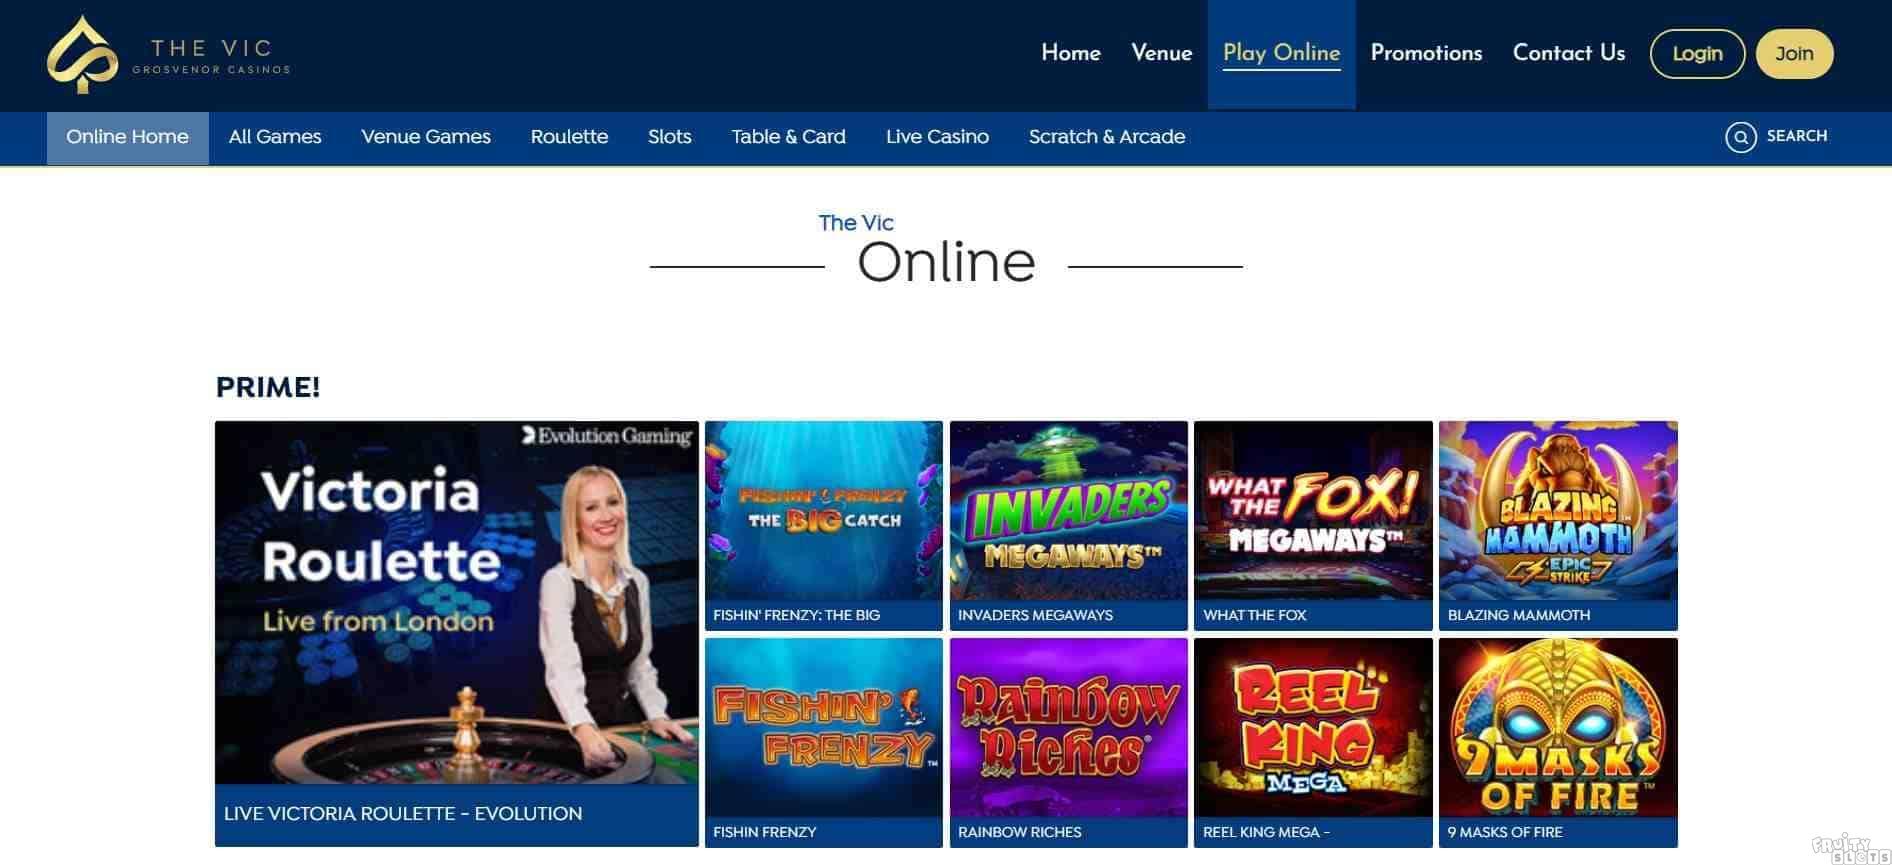 The Vic Casino Home Page